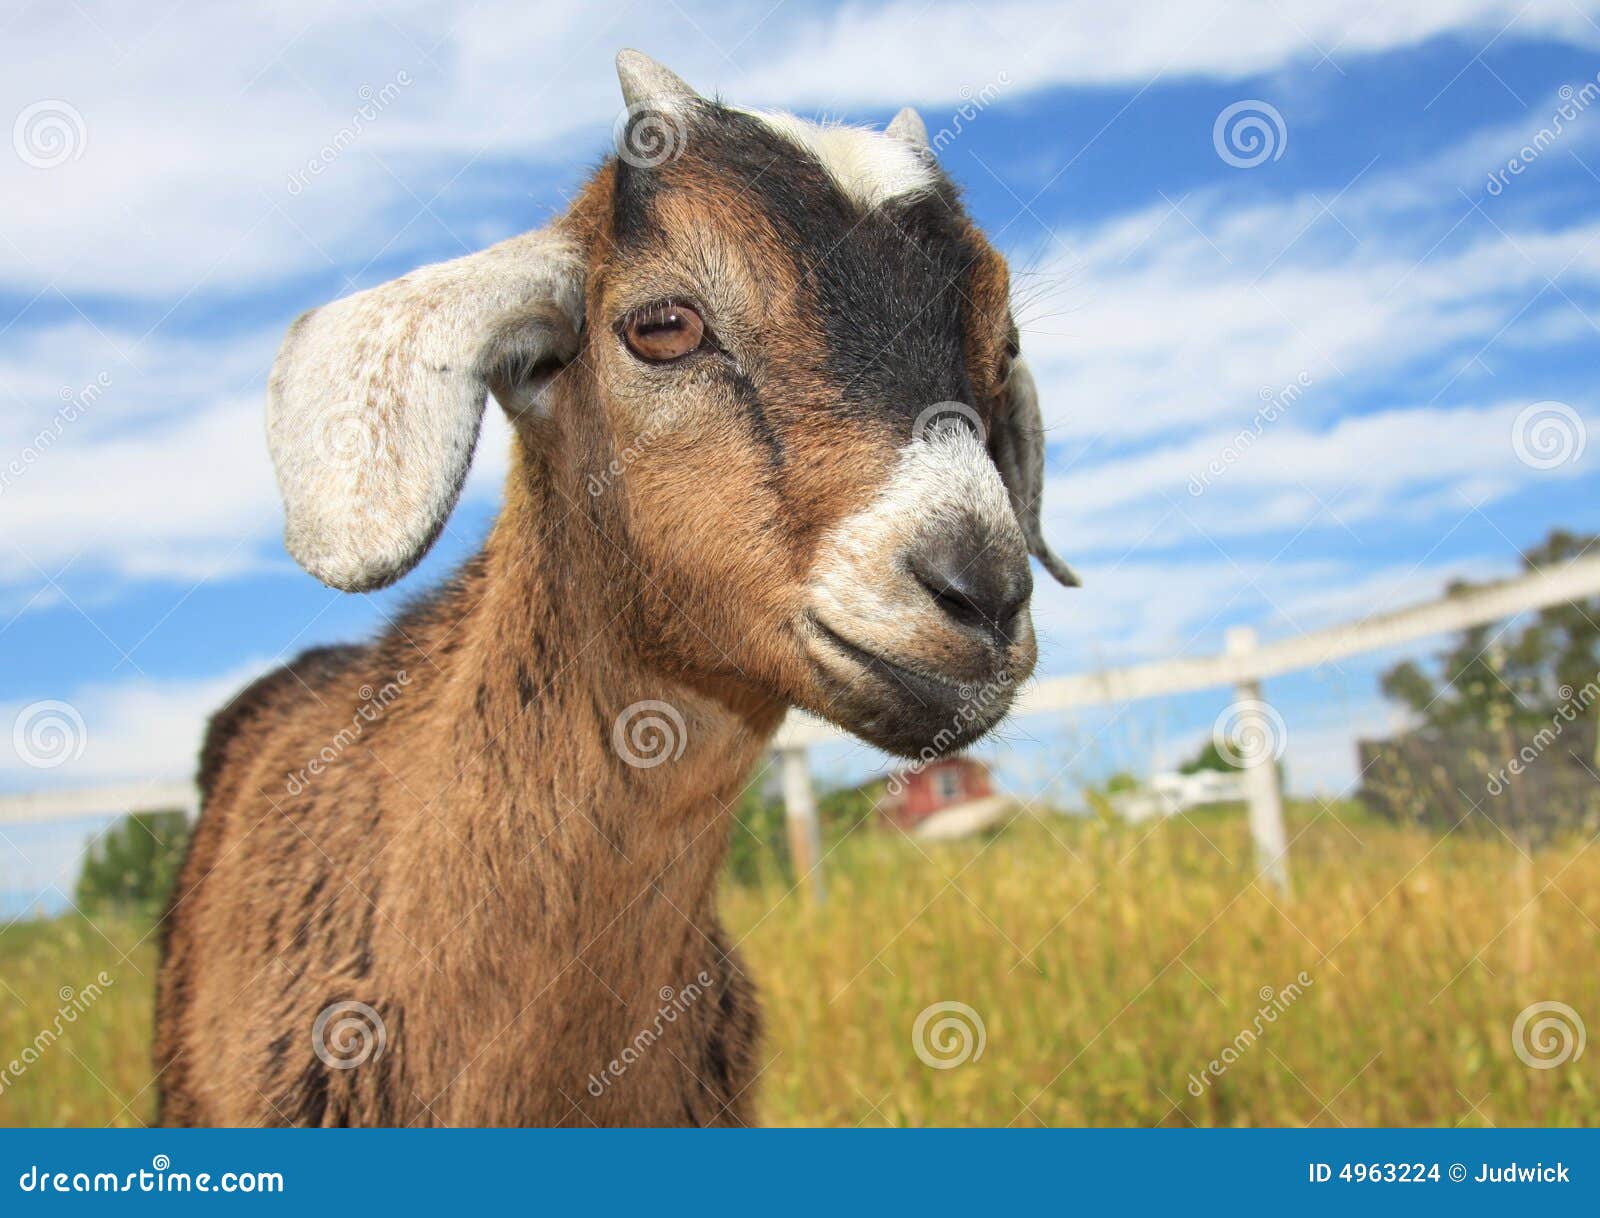 young kinder goat